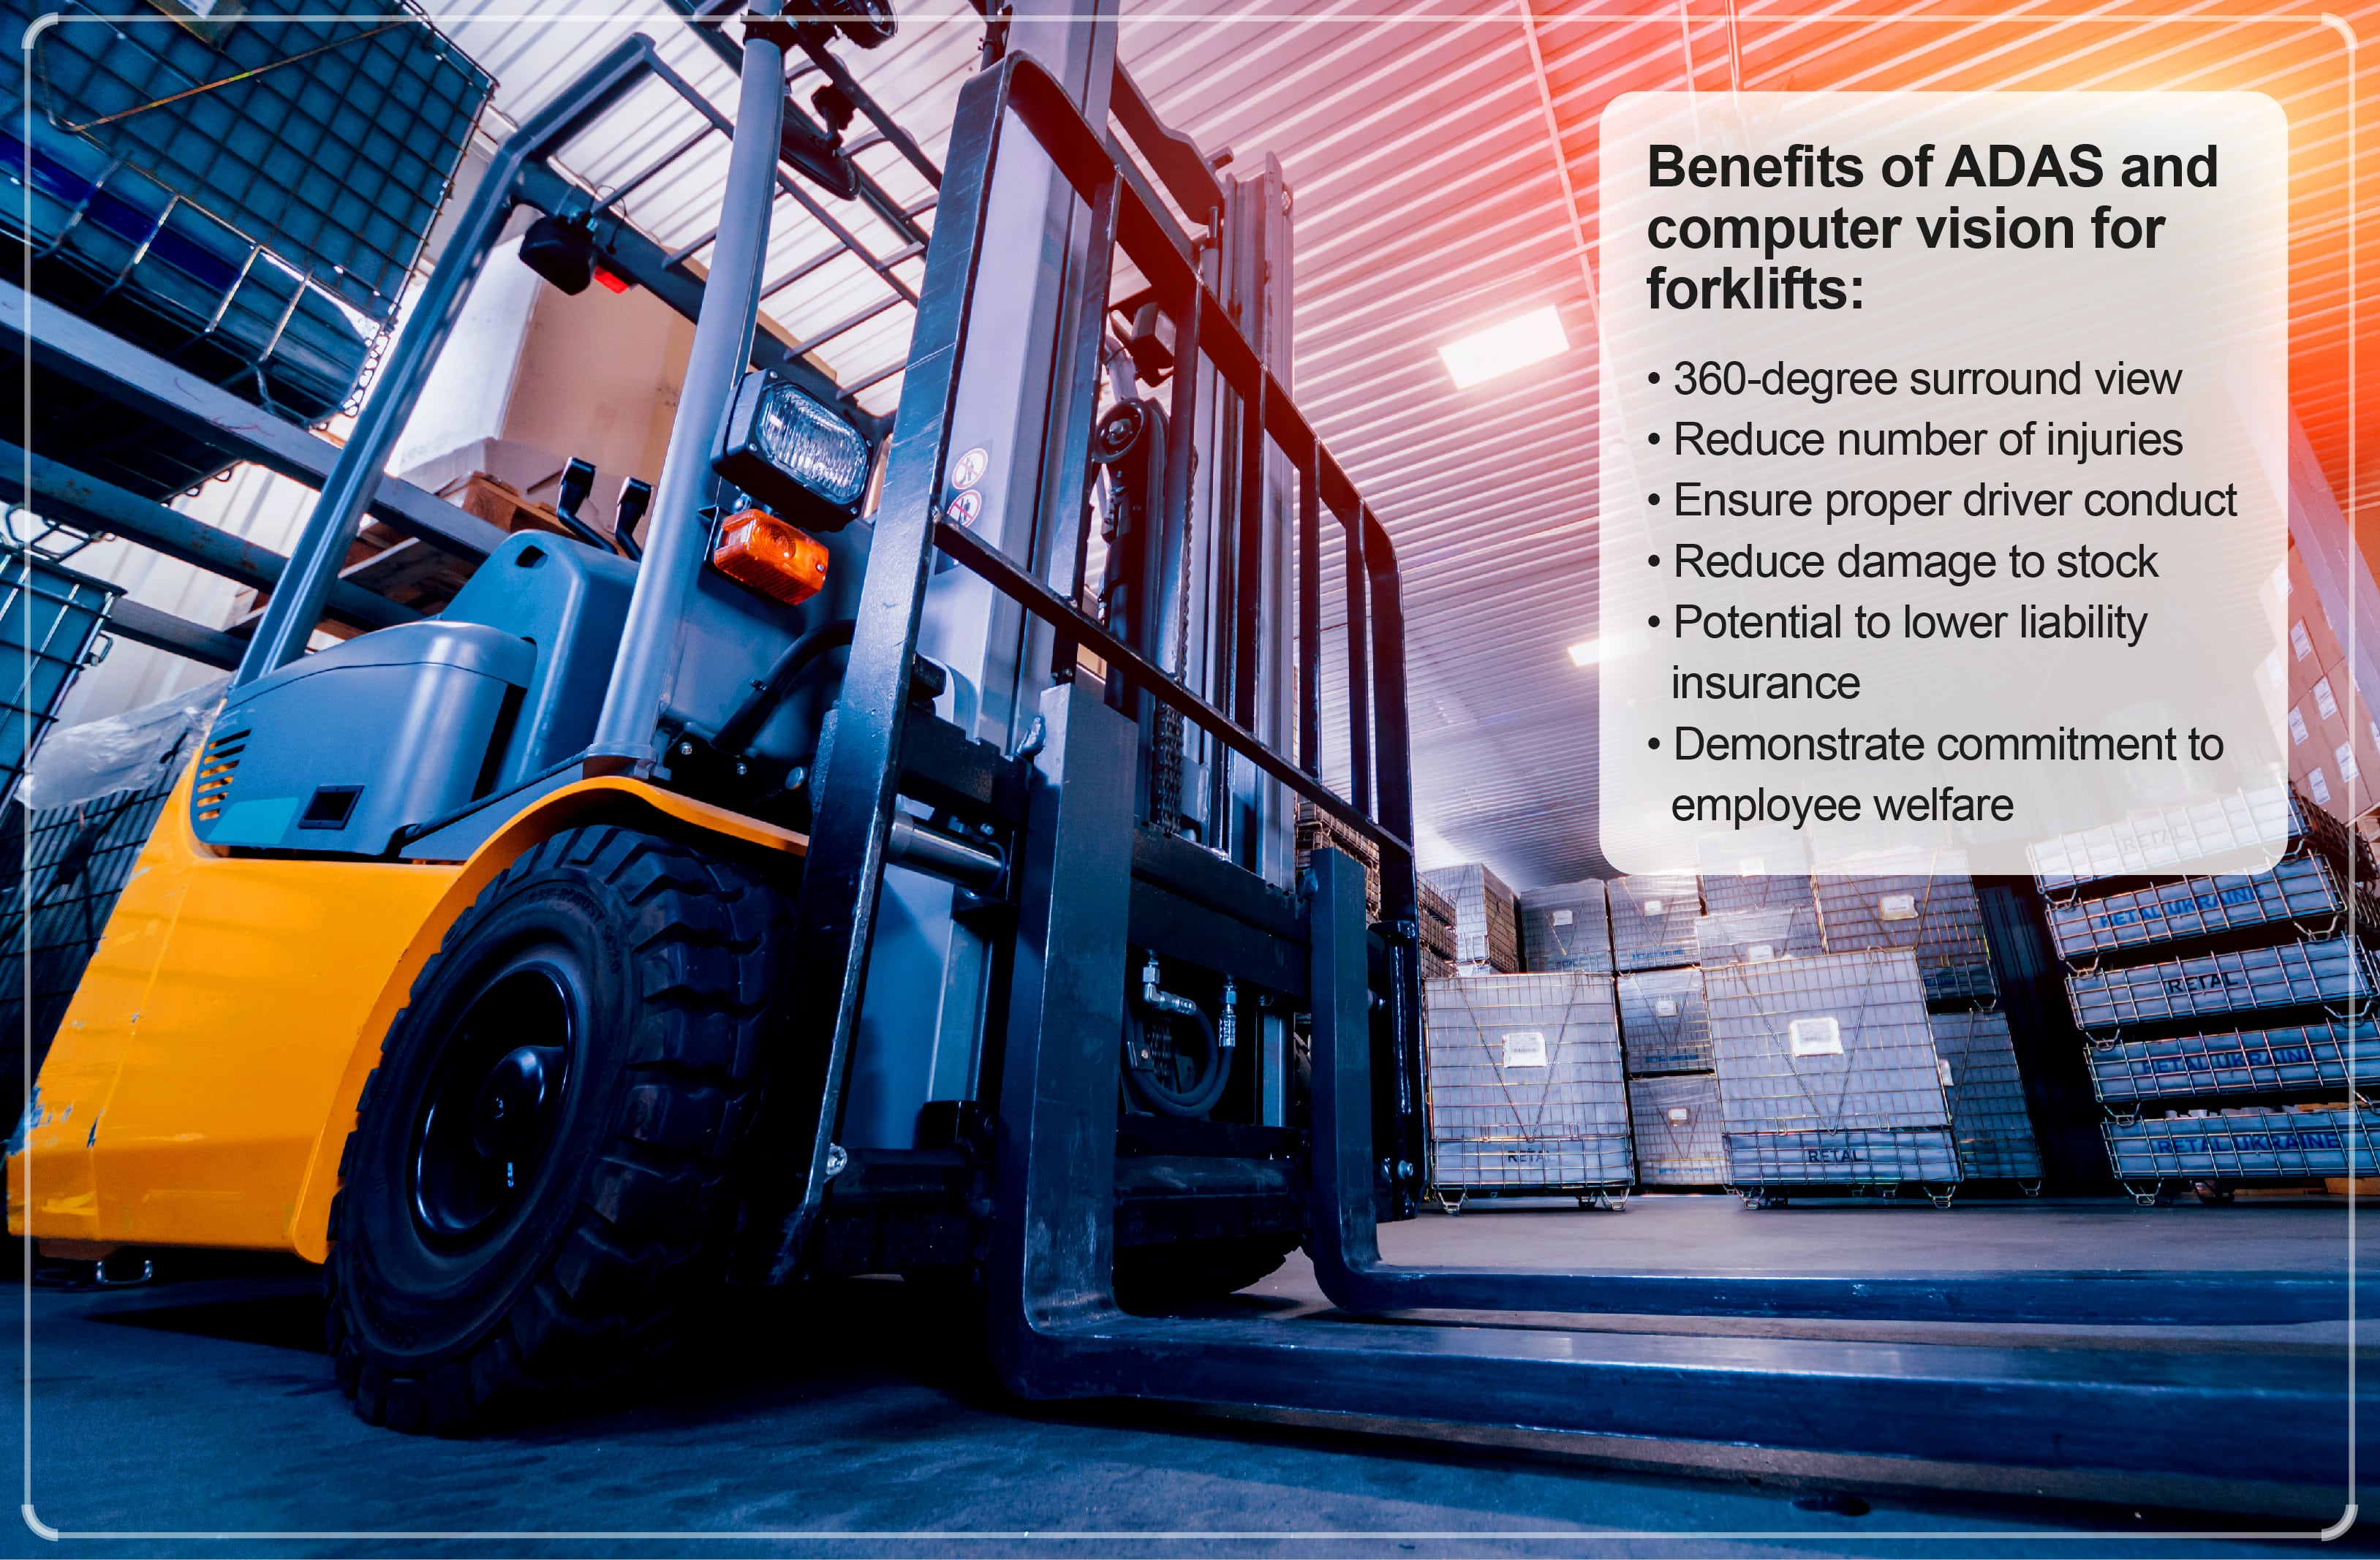 Benefits of advanced vehicle safety systems in warehouses